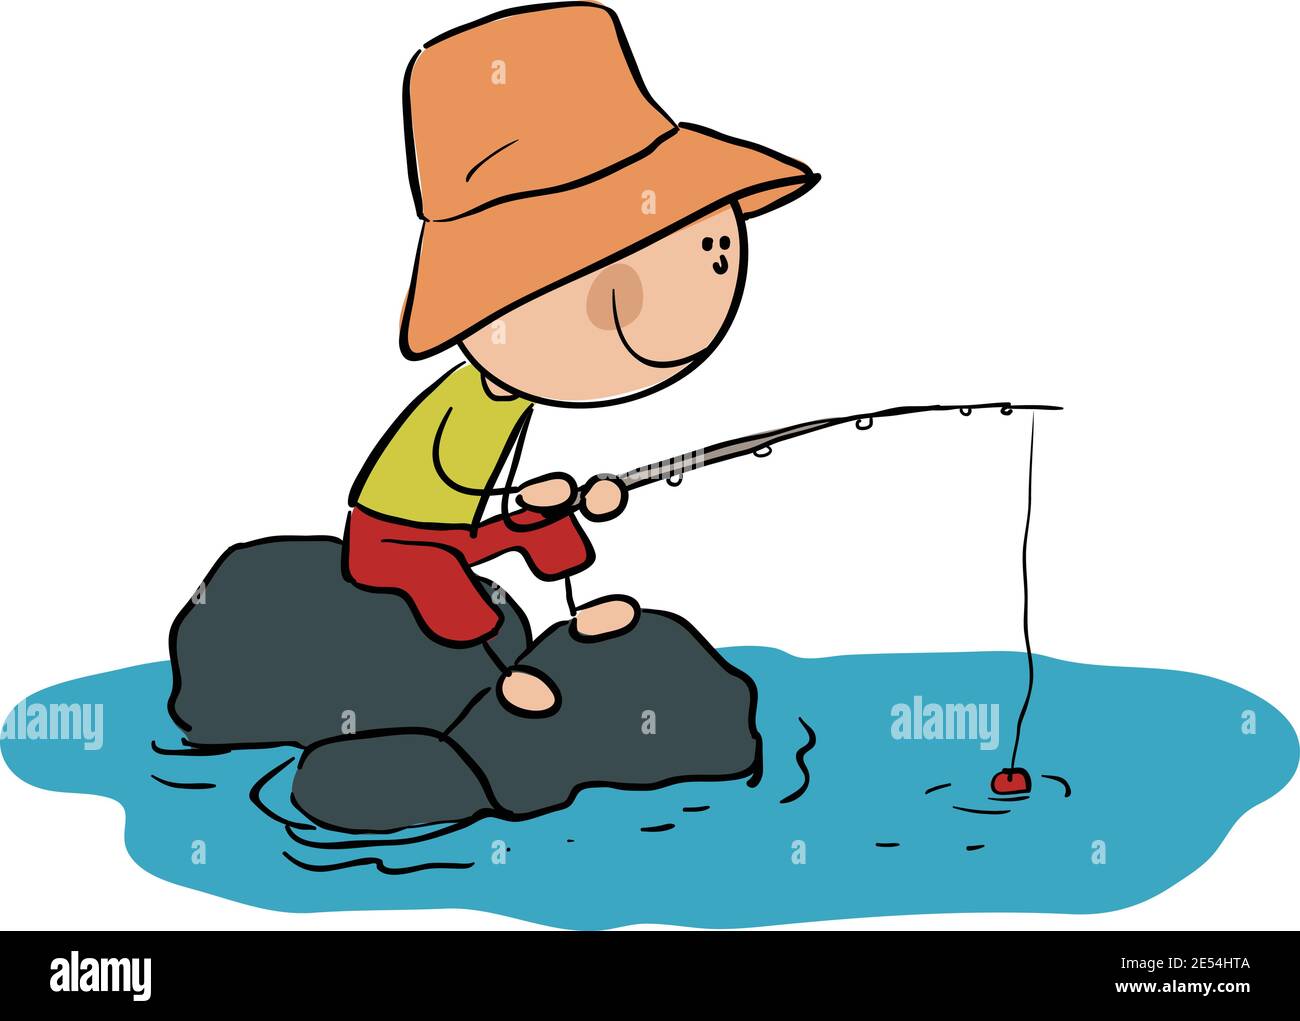 Boys catching fish Stock Vector Images - Alamy